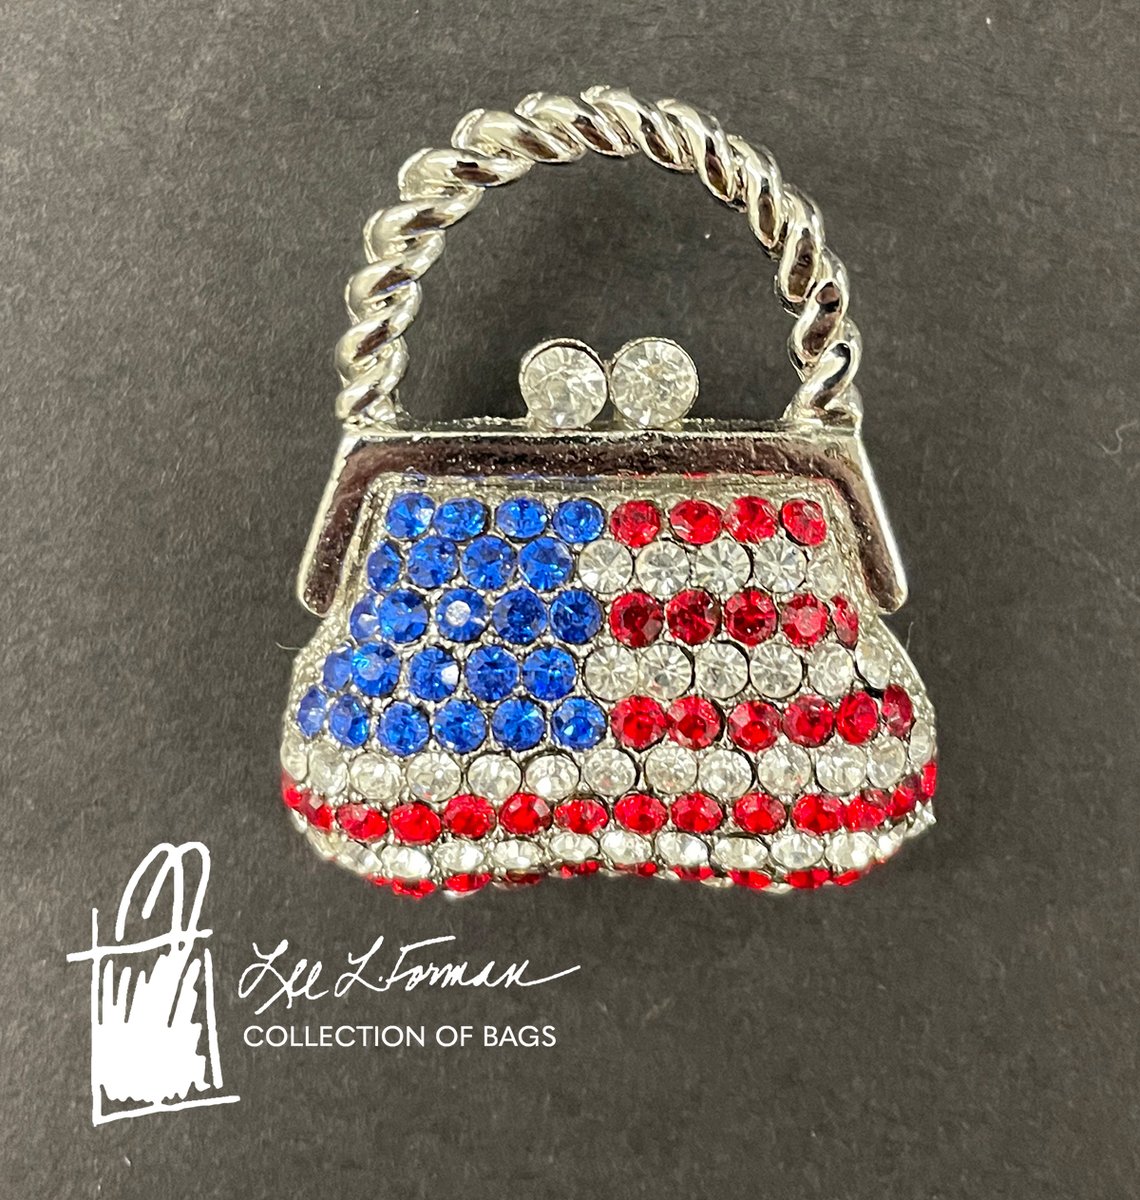 11/365: Just how small can they get? This silver handbag pin is only 1 inch wide and features the American flag in red, white, and blue stones.